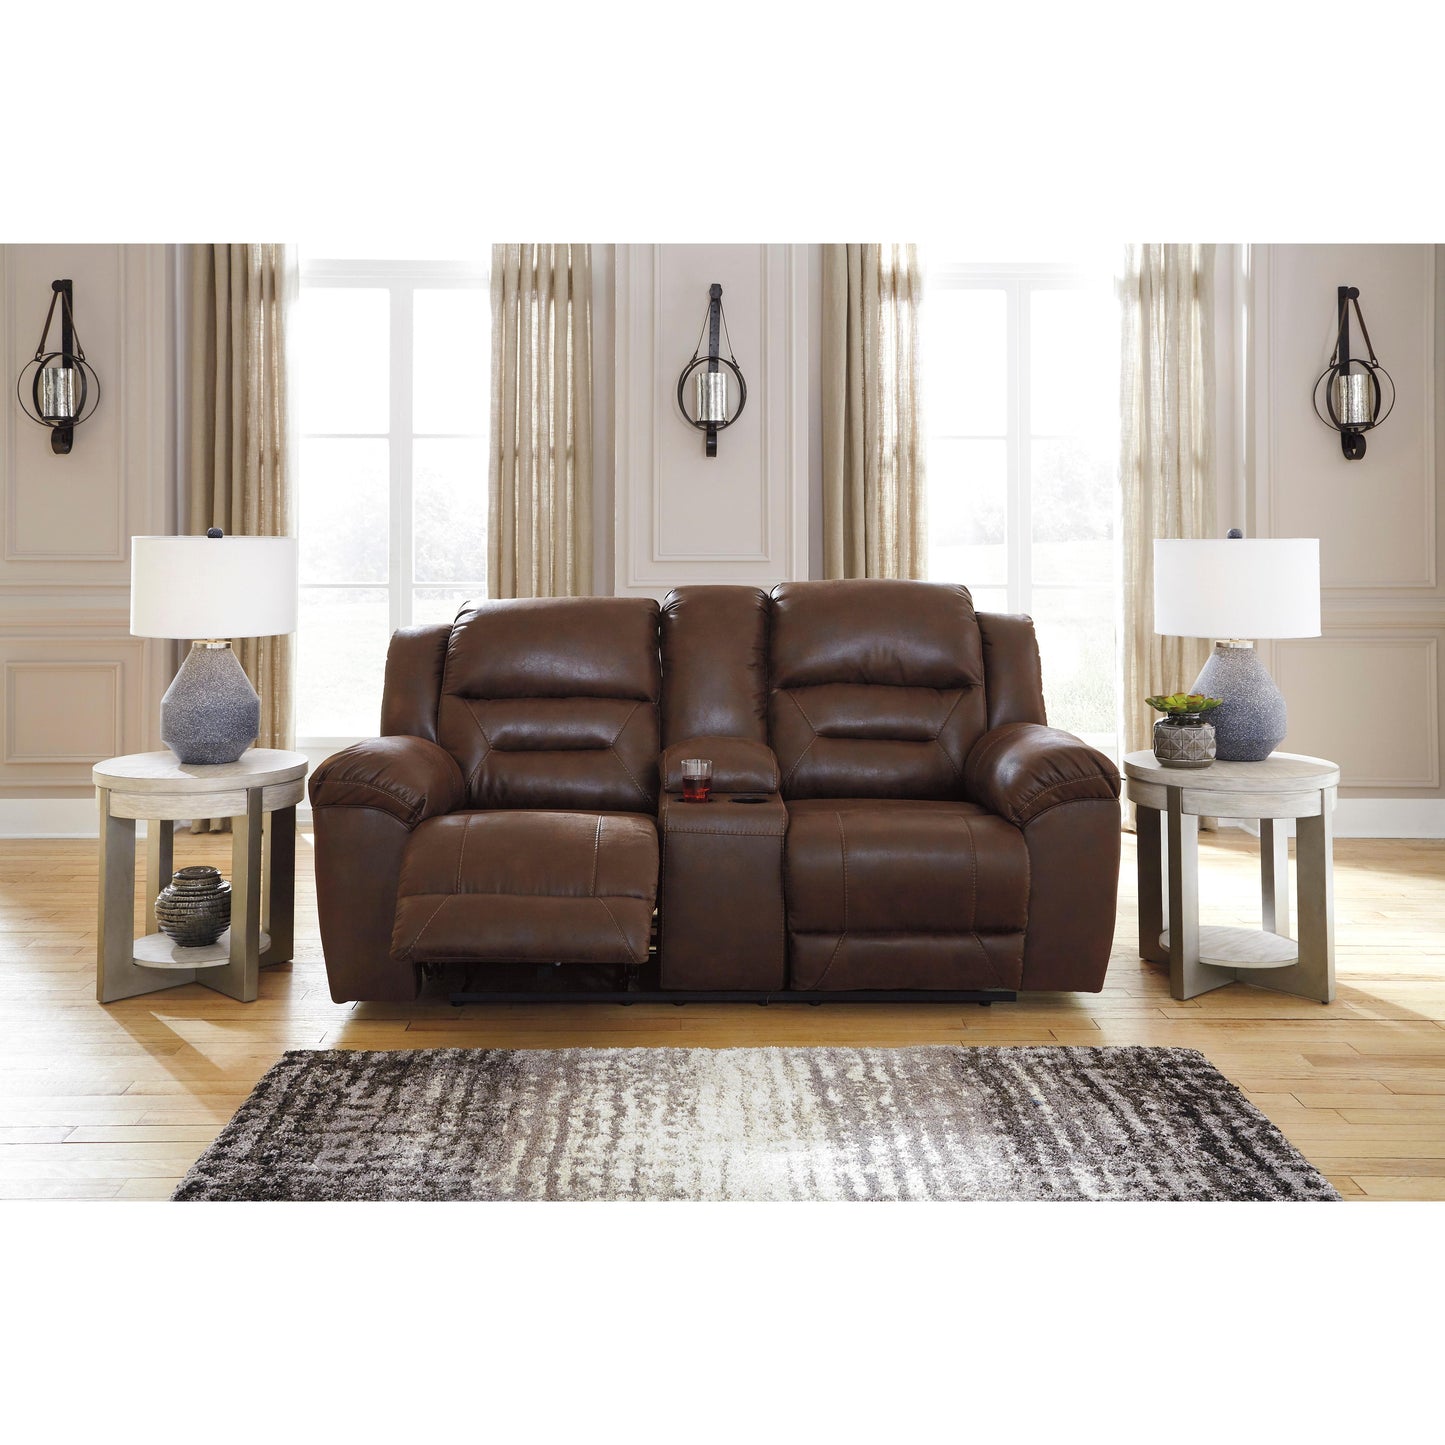 Signature Design by Ashley Stoneland Reclining Leather Look Loveseat 3990494